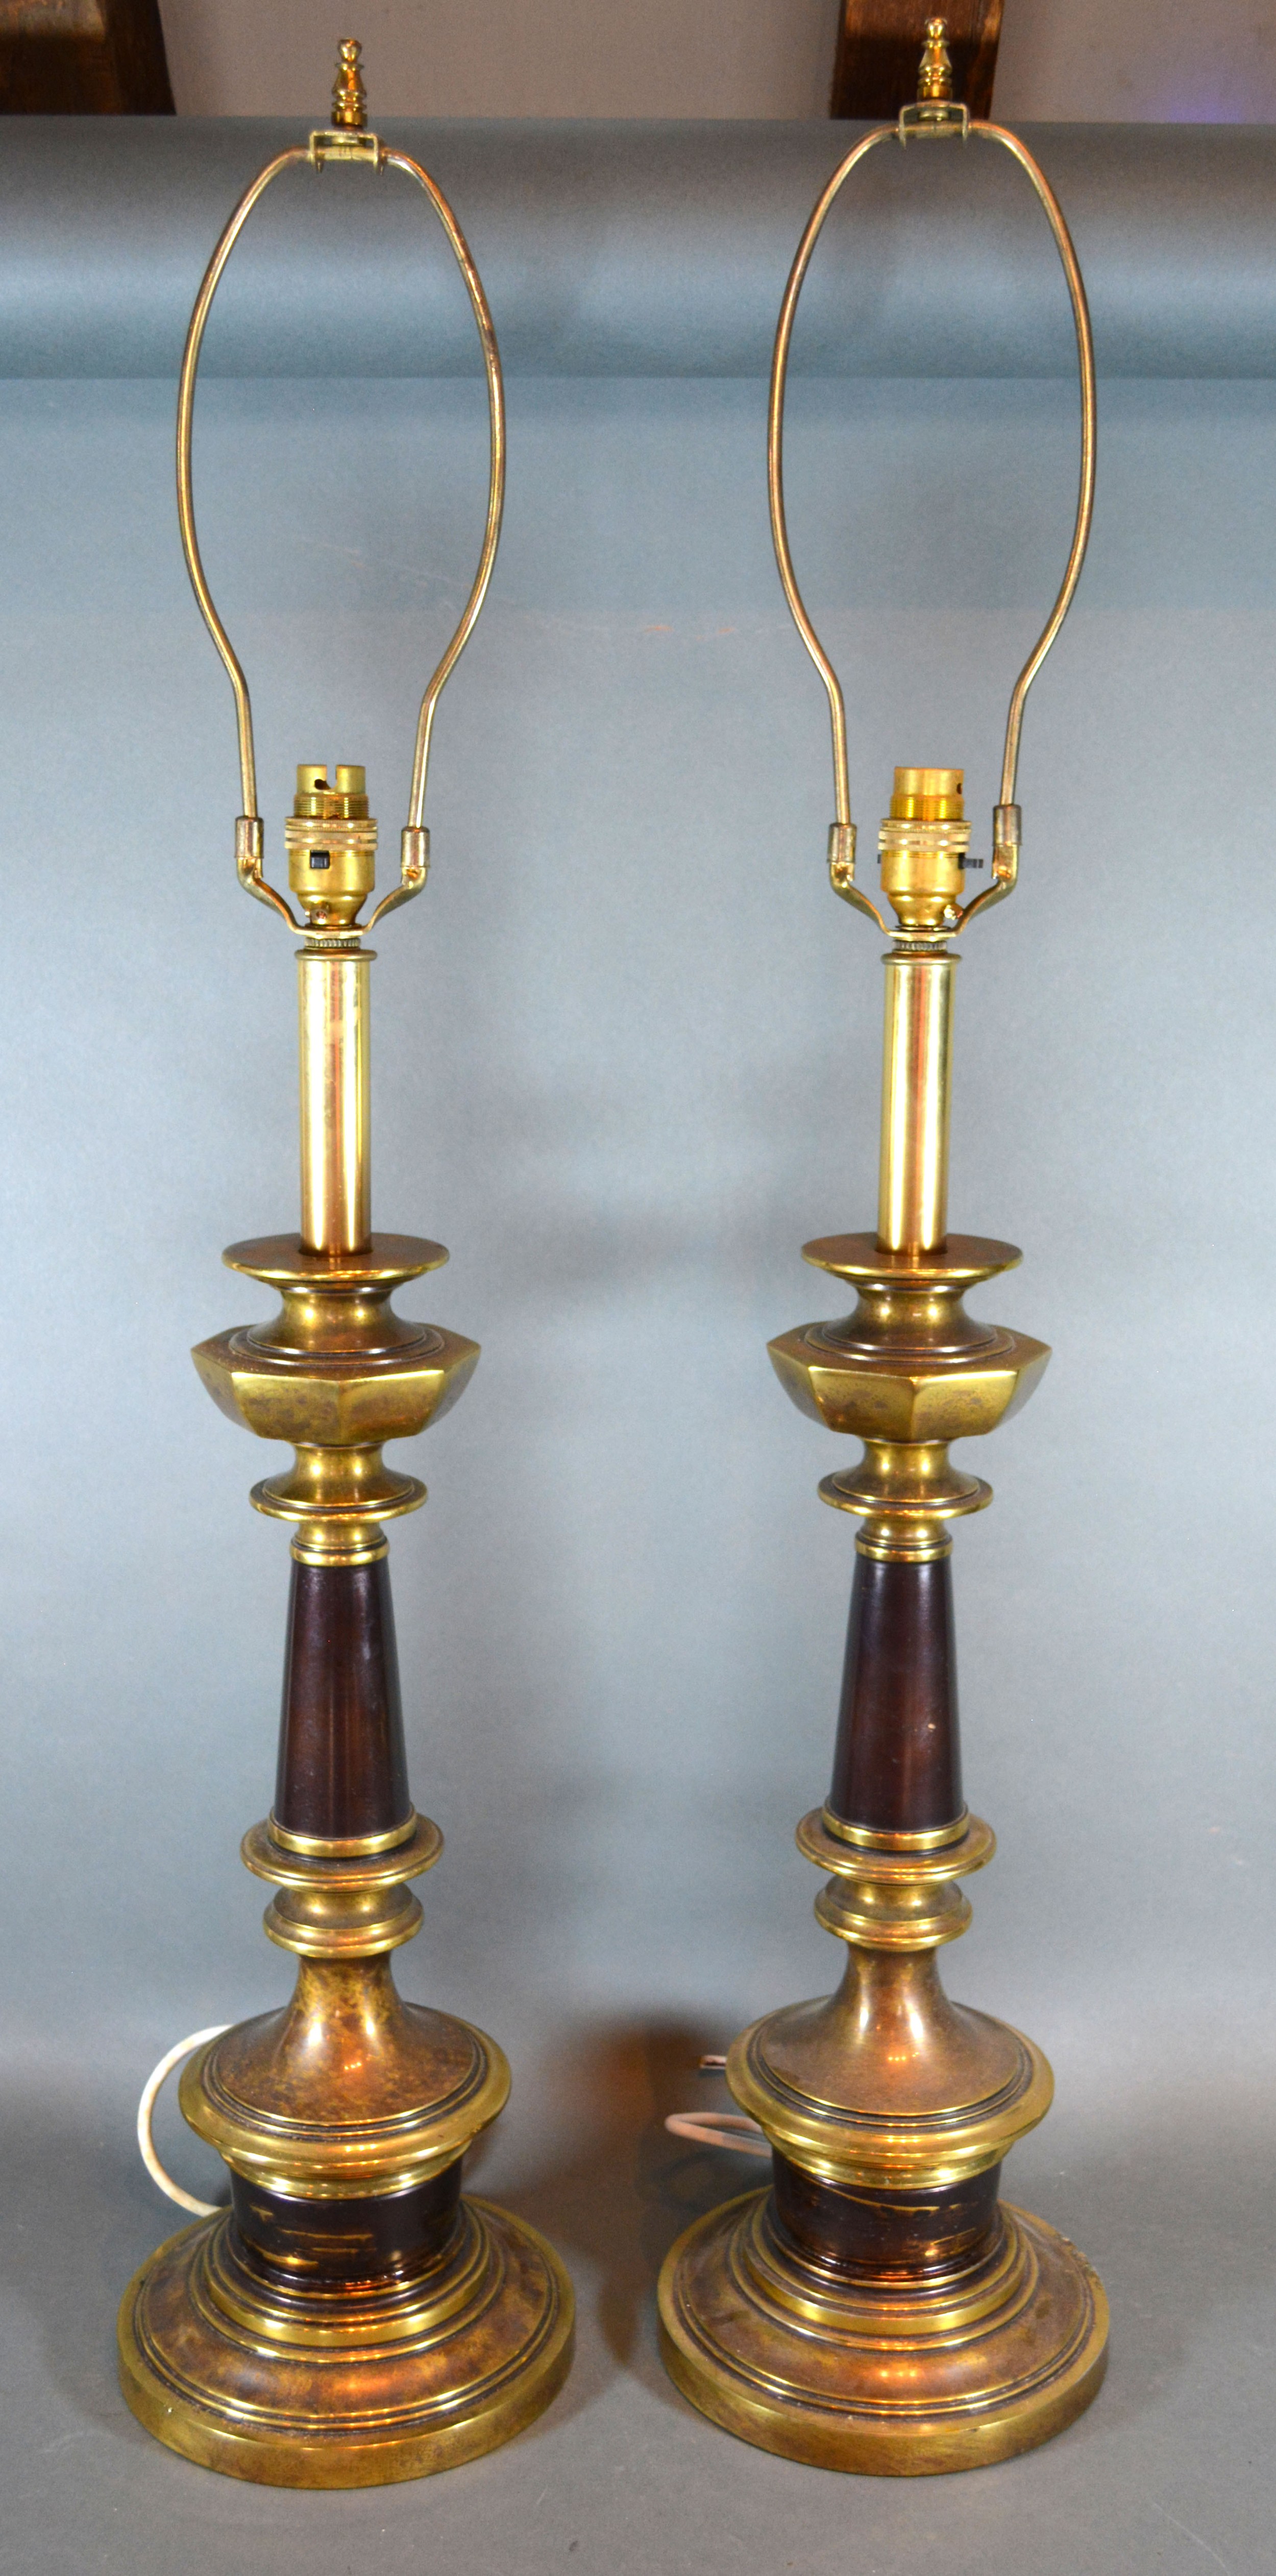 A Pair of Patinated Metal Table Lamps 60 cms tall